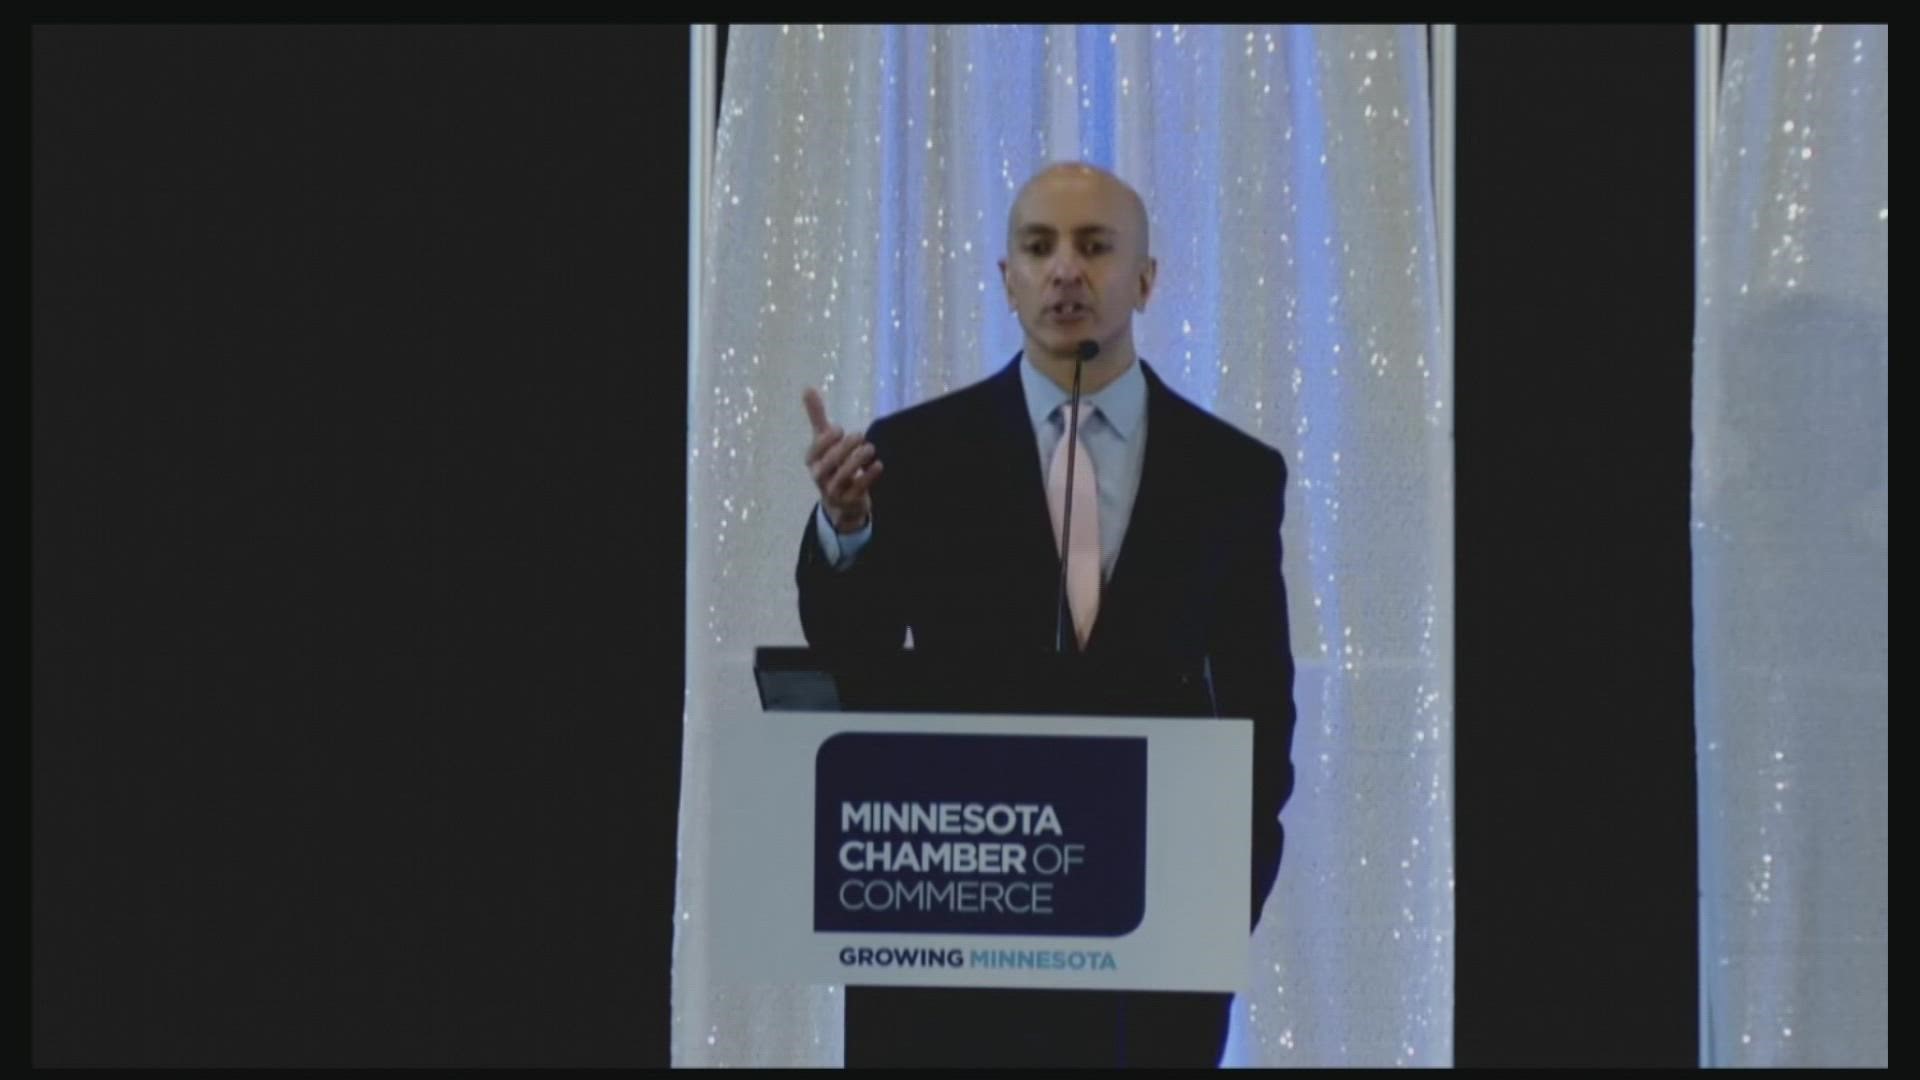 Neel Kashkari appeared at the Minnesota Chamber of Commerce annual event to talk about actions the Fed is taking to get inflation under control.